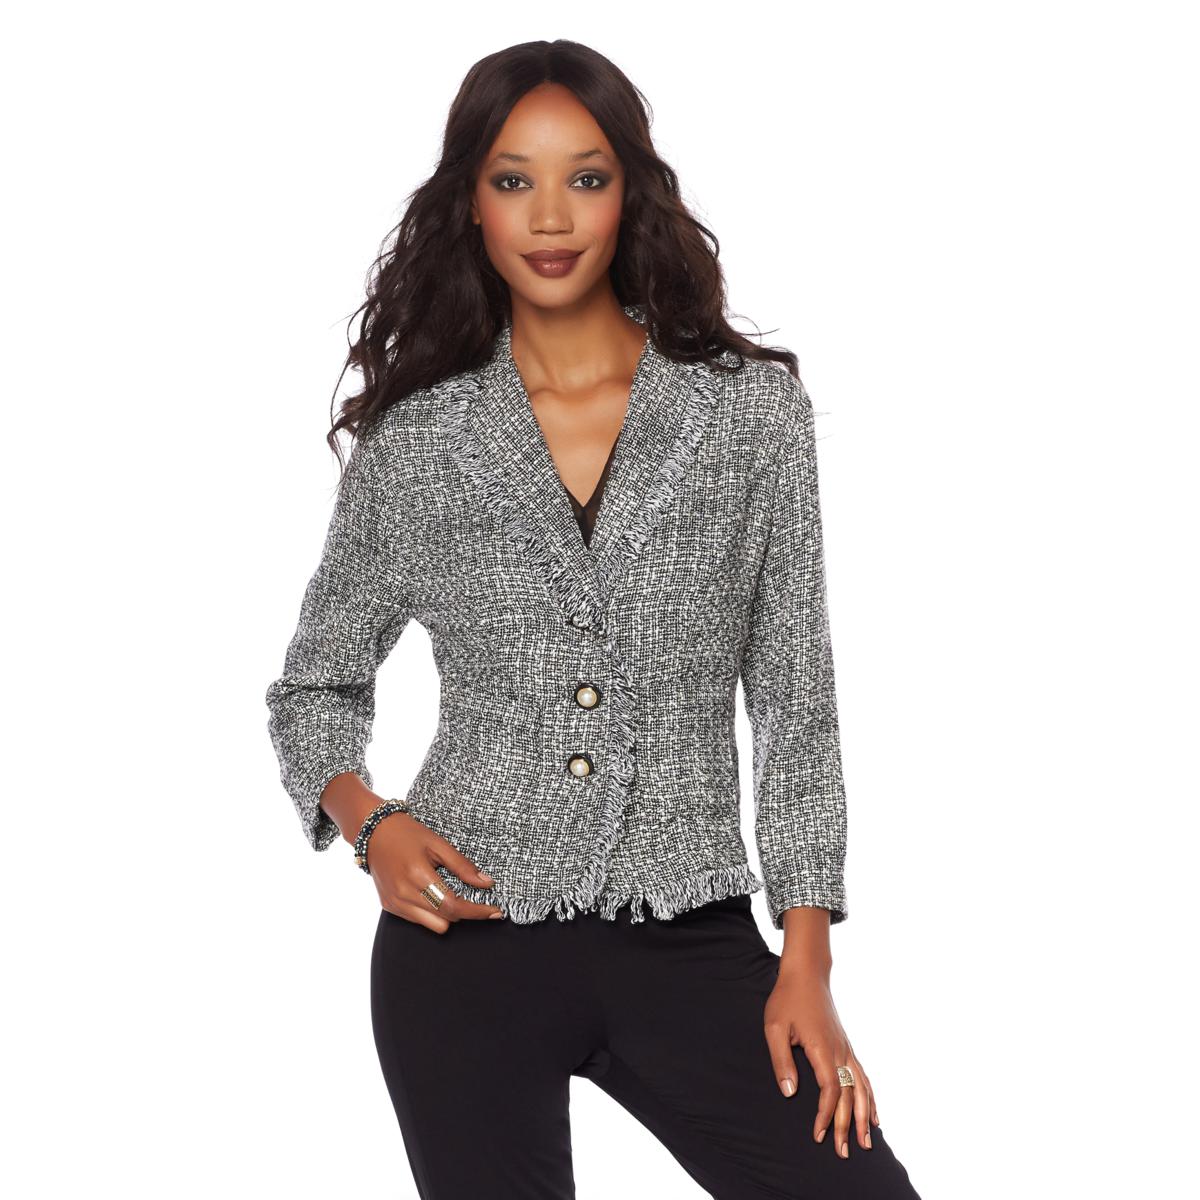 The 3 Jackets To Layer On This Fall - HSN Blogs